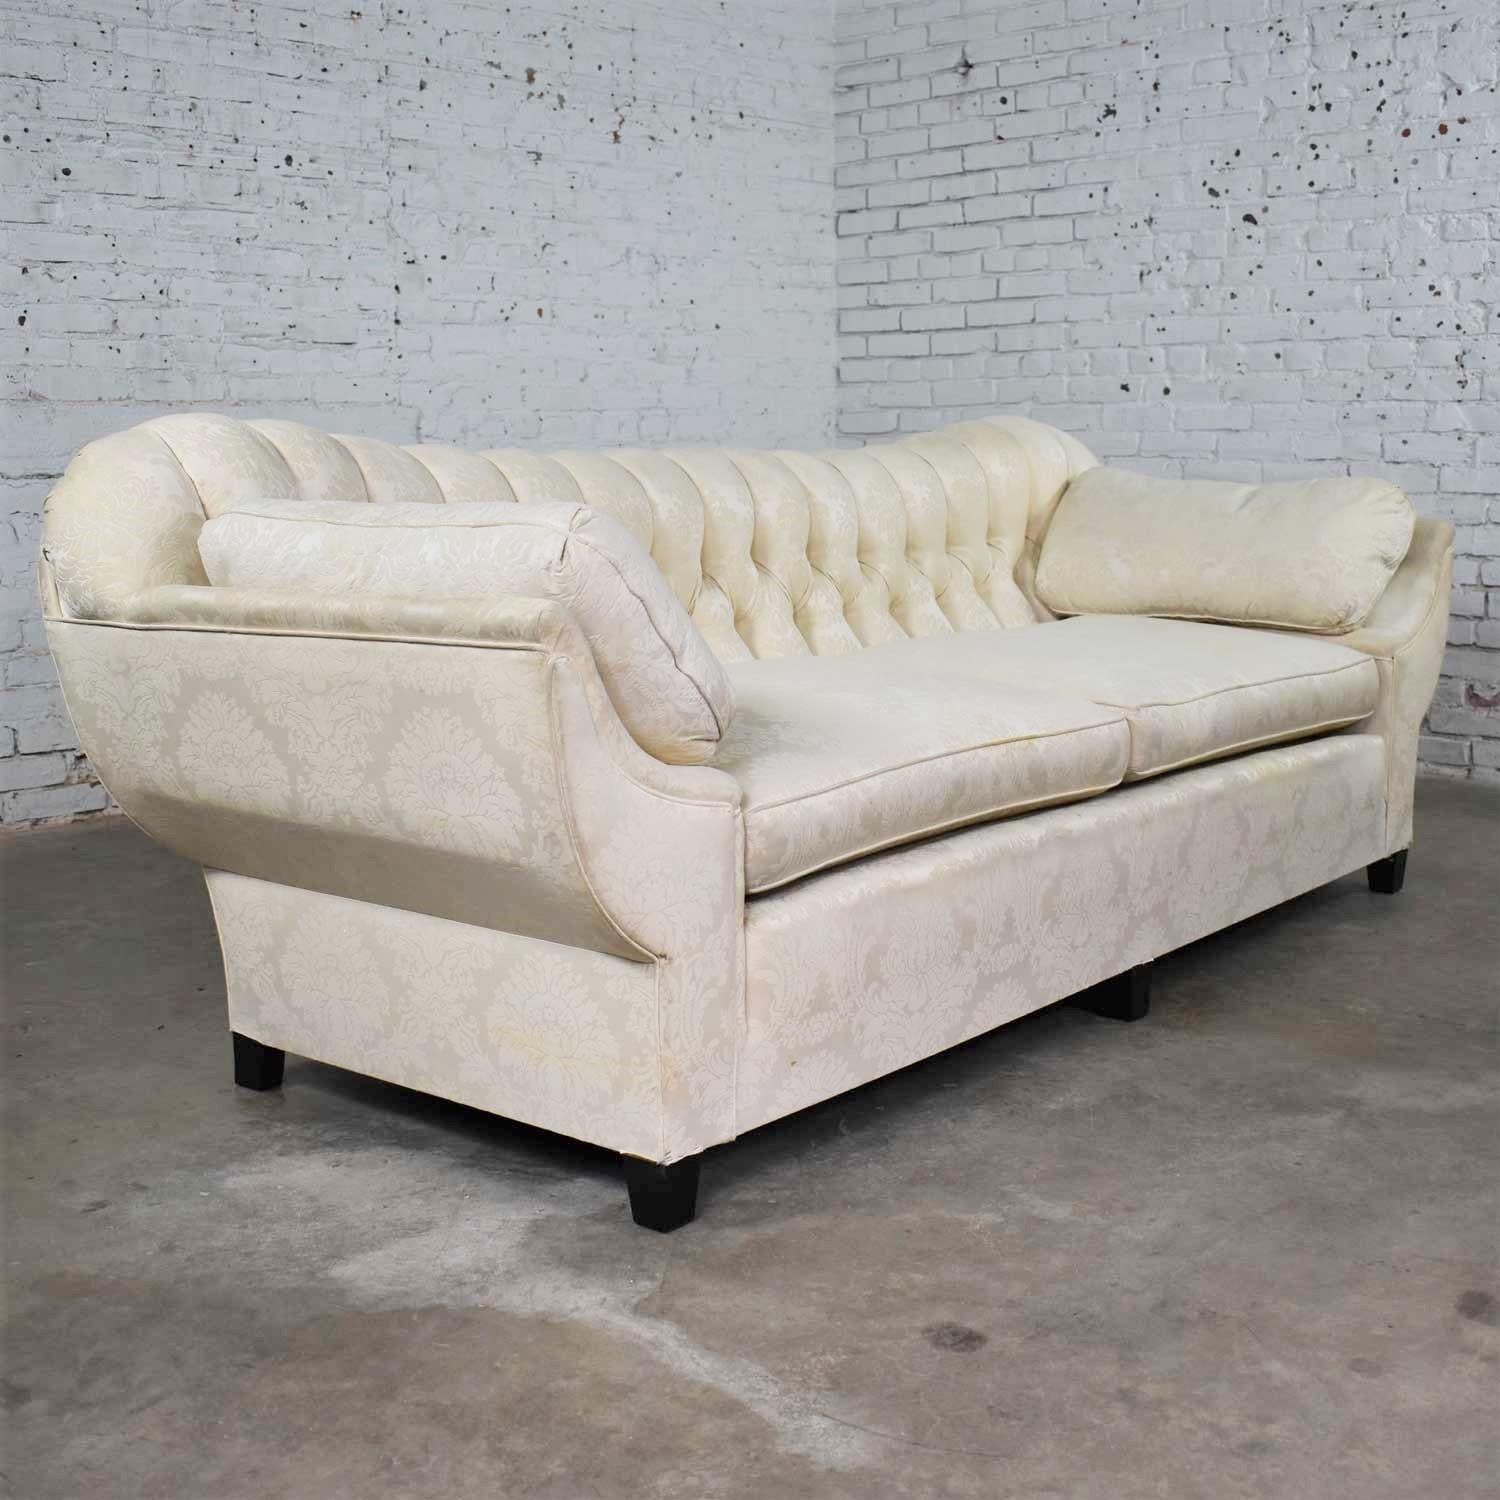 Vintage Art Deco Hollywood Regency Sofa Tufted Back and Concave Pillowed Arms For Sale 8